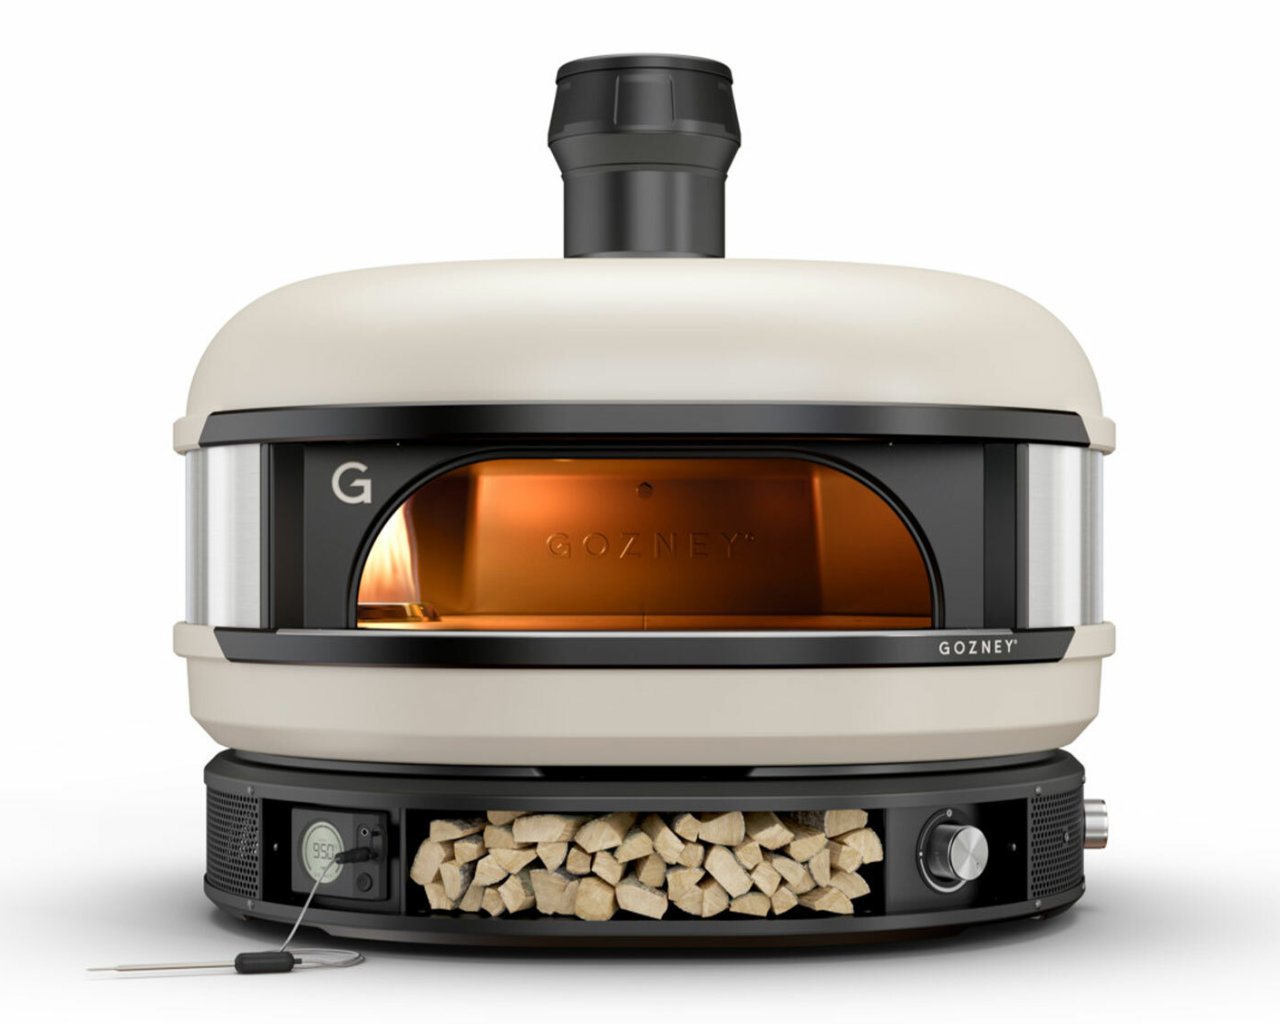 Gozney Dome Dual Fuel Pizza Oven, , hi-res image number null